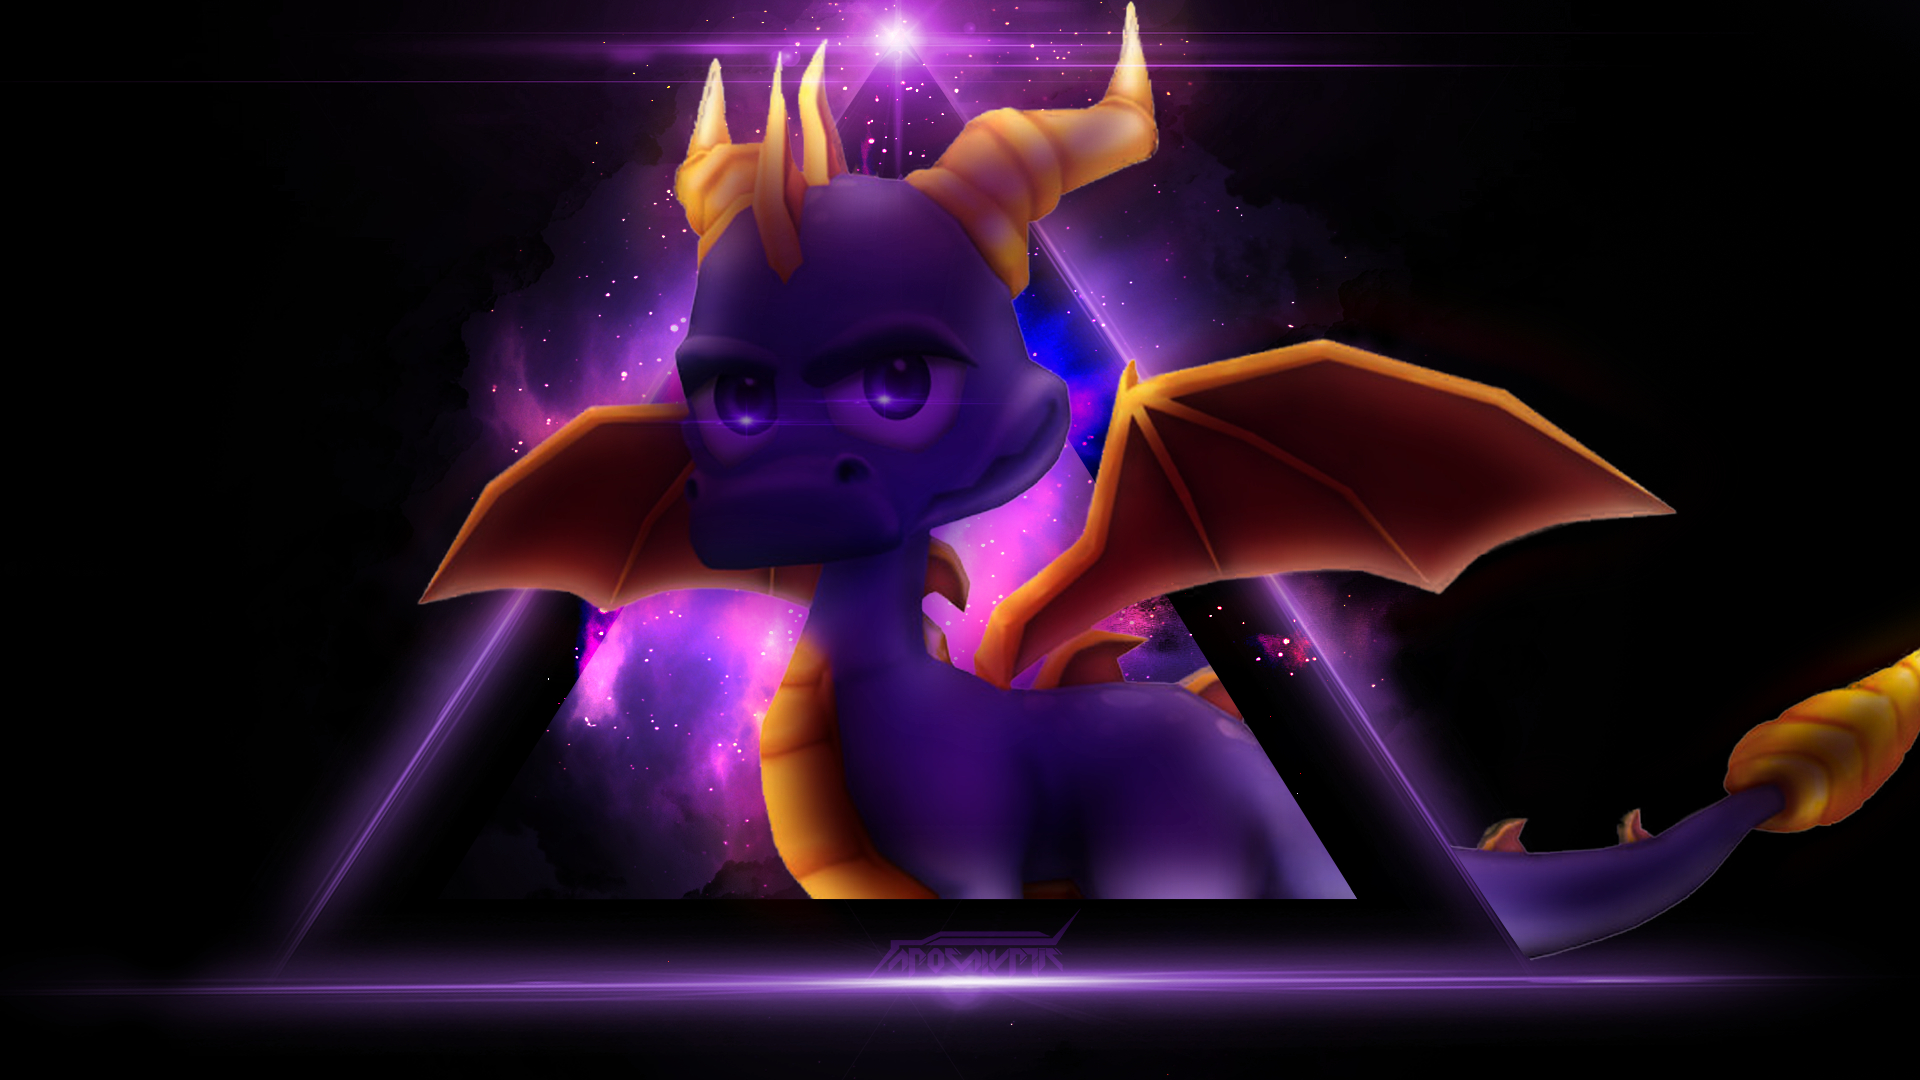 1920x1080 Free download Wallpaper Spyro by OfficialApocalyptic [] for your Desktop, Mobile \u0026 Tablet | Explore 77+ Spyro Wallpapers | Spyro The Dragon Wallpaper, The Legend of Spyro Wallpaper, Skylanders Wallpaper Backgrounds